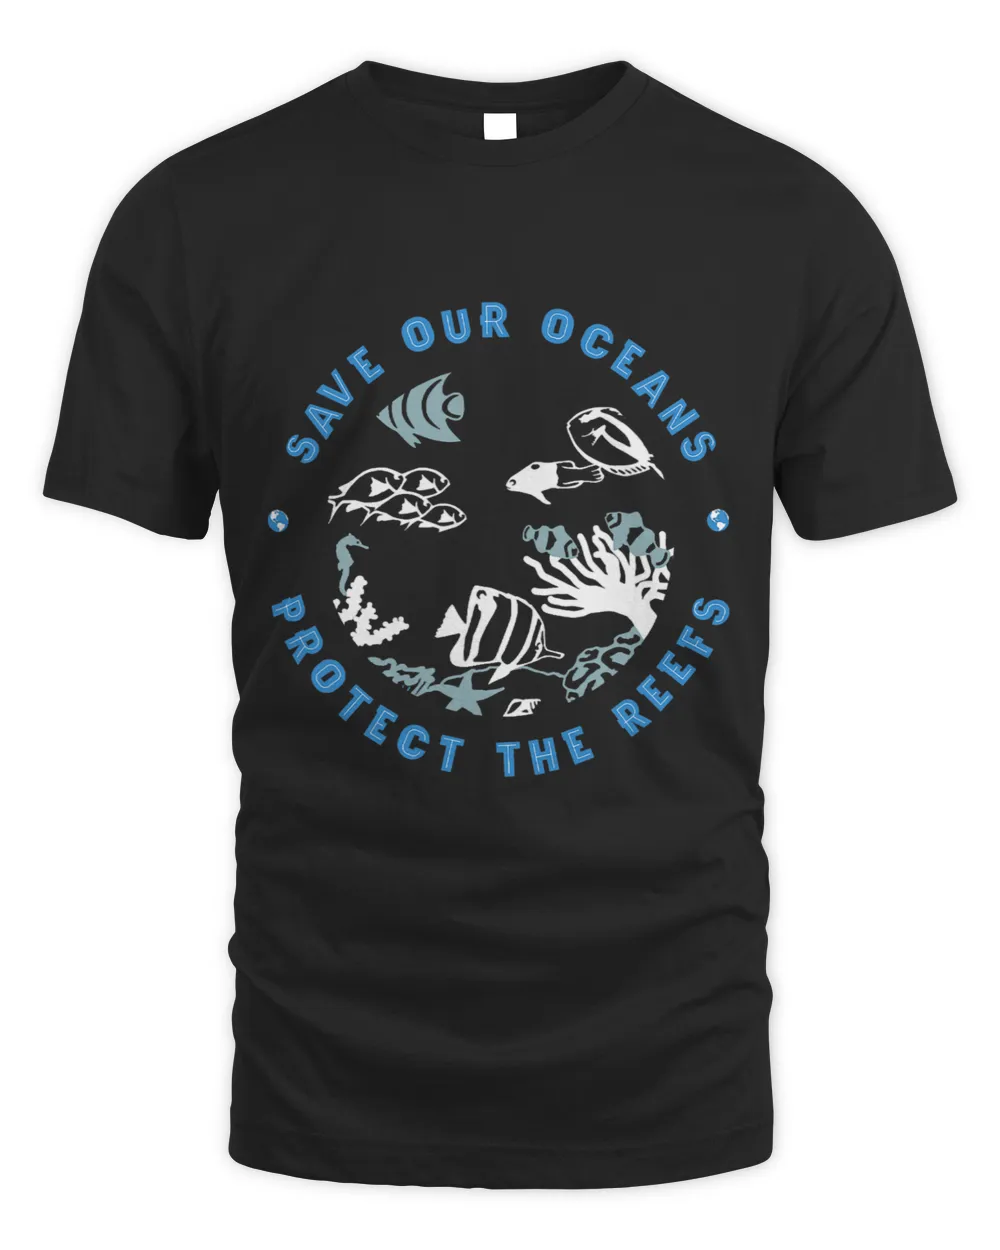 Save our Oceans Protect the Reefs Coral Reefs Earth Day